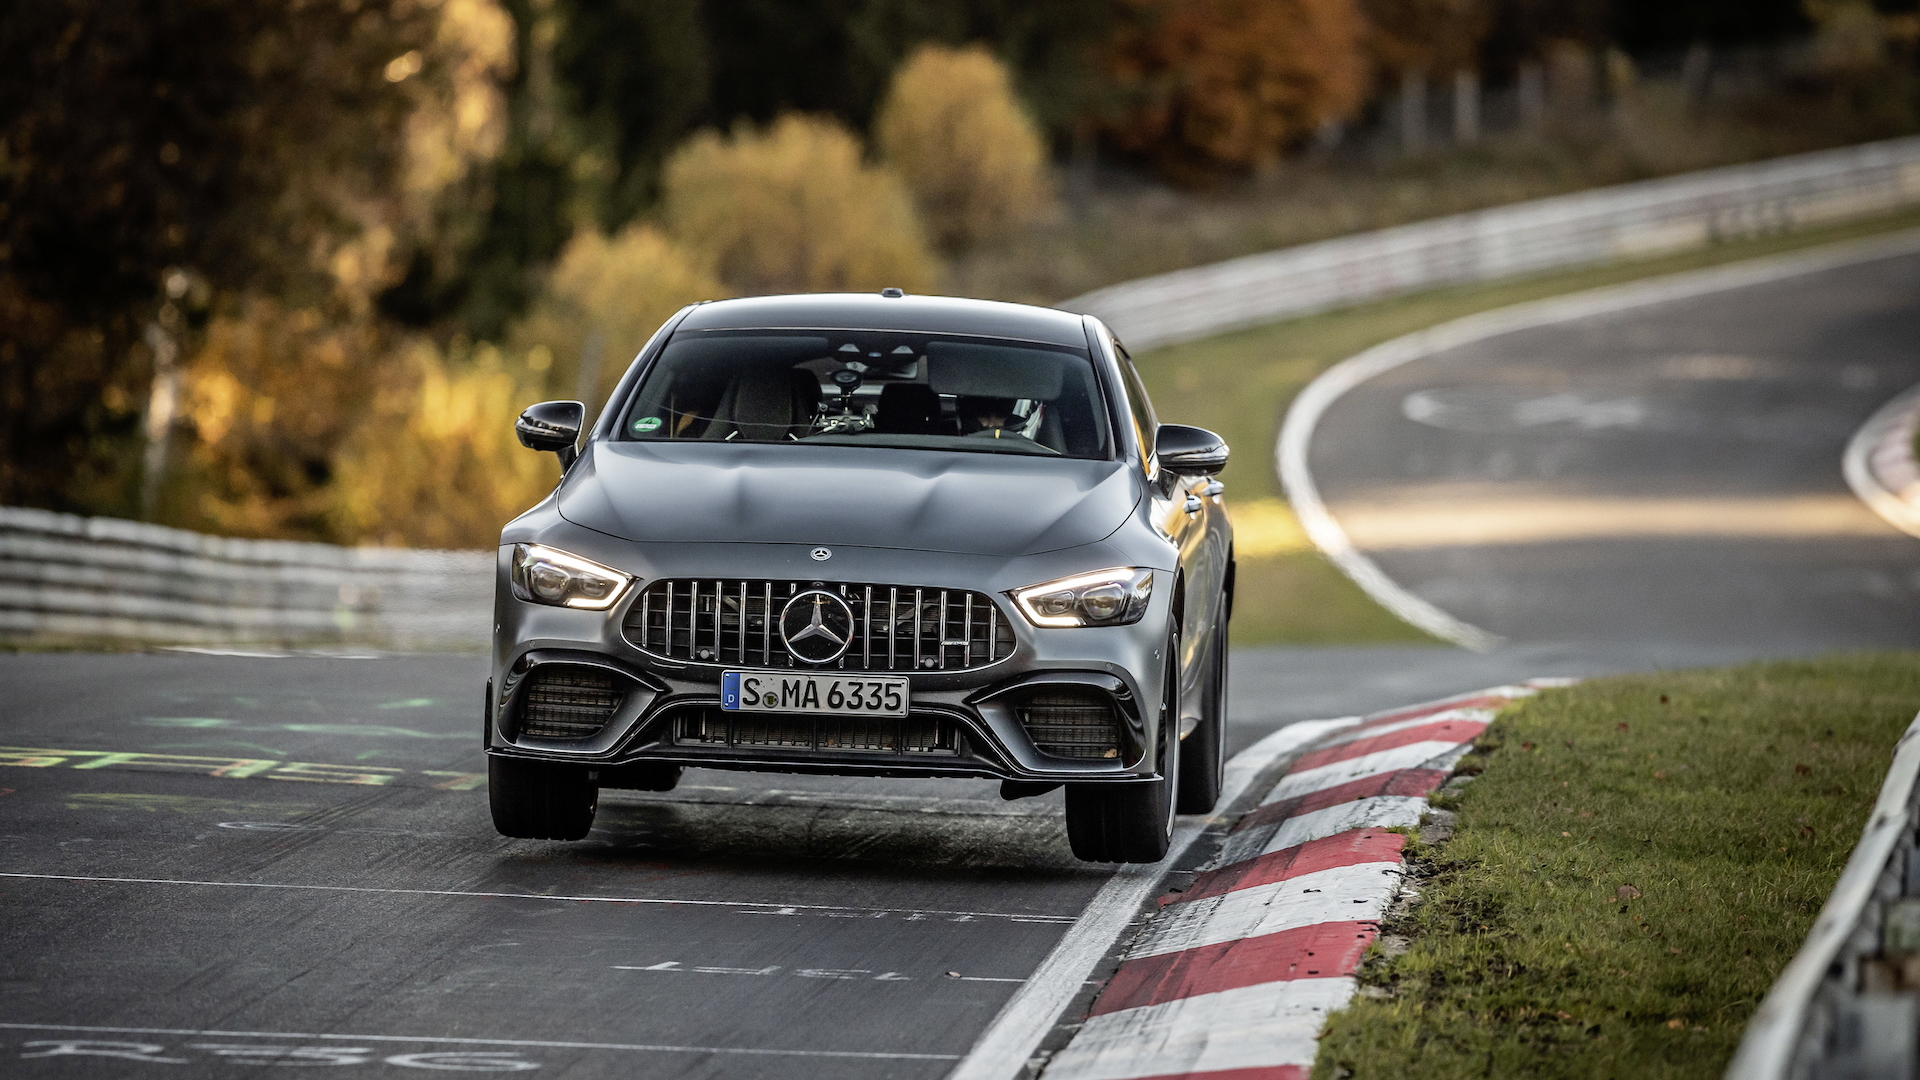 2021 Mercedes AMG GT 63 S 4 Door Coupe made faster N 252 rburgring proves it